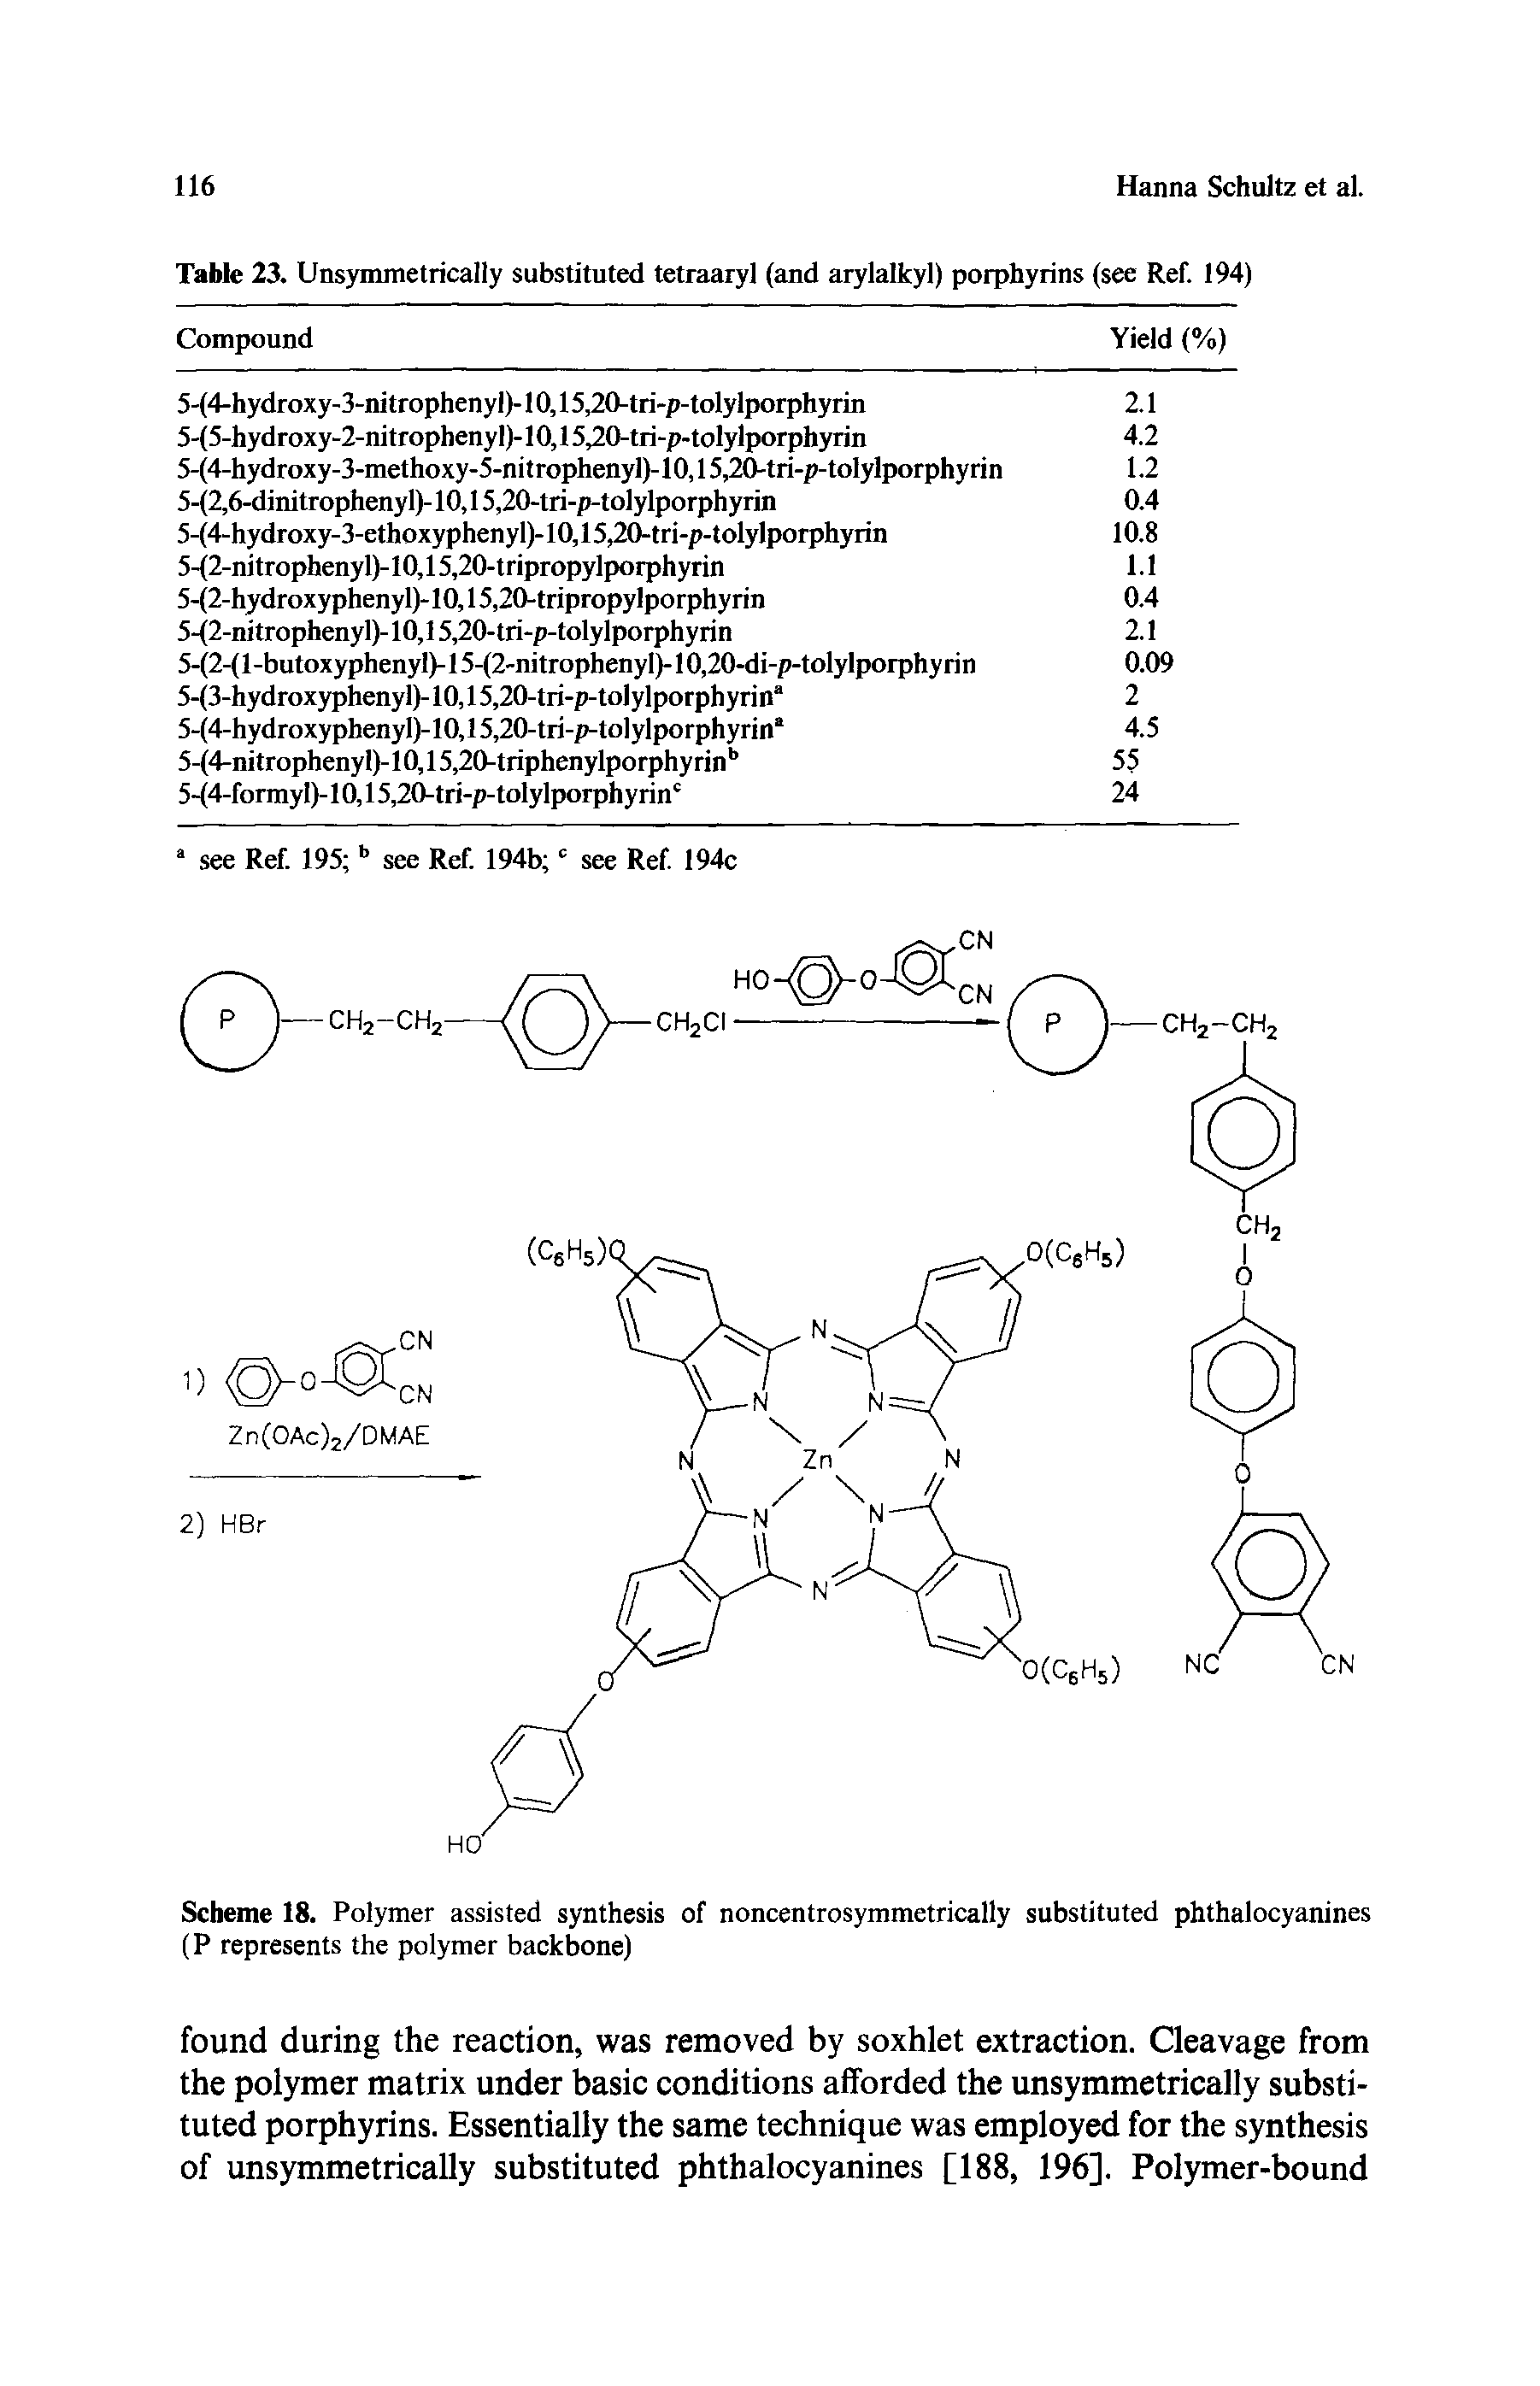 Scheme 18. Polymer assisted synthesis of noncentrosymmetrically substituted phthalocyanines (P represents the polymer backbone)...